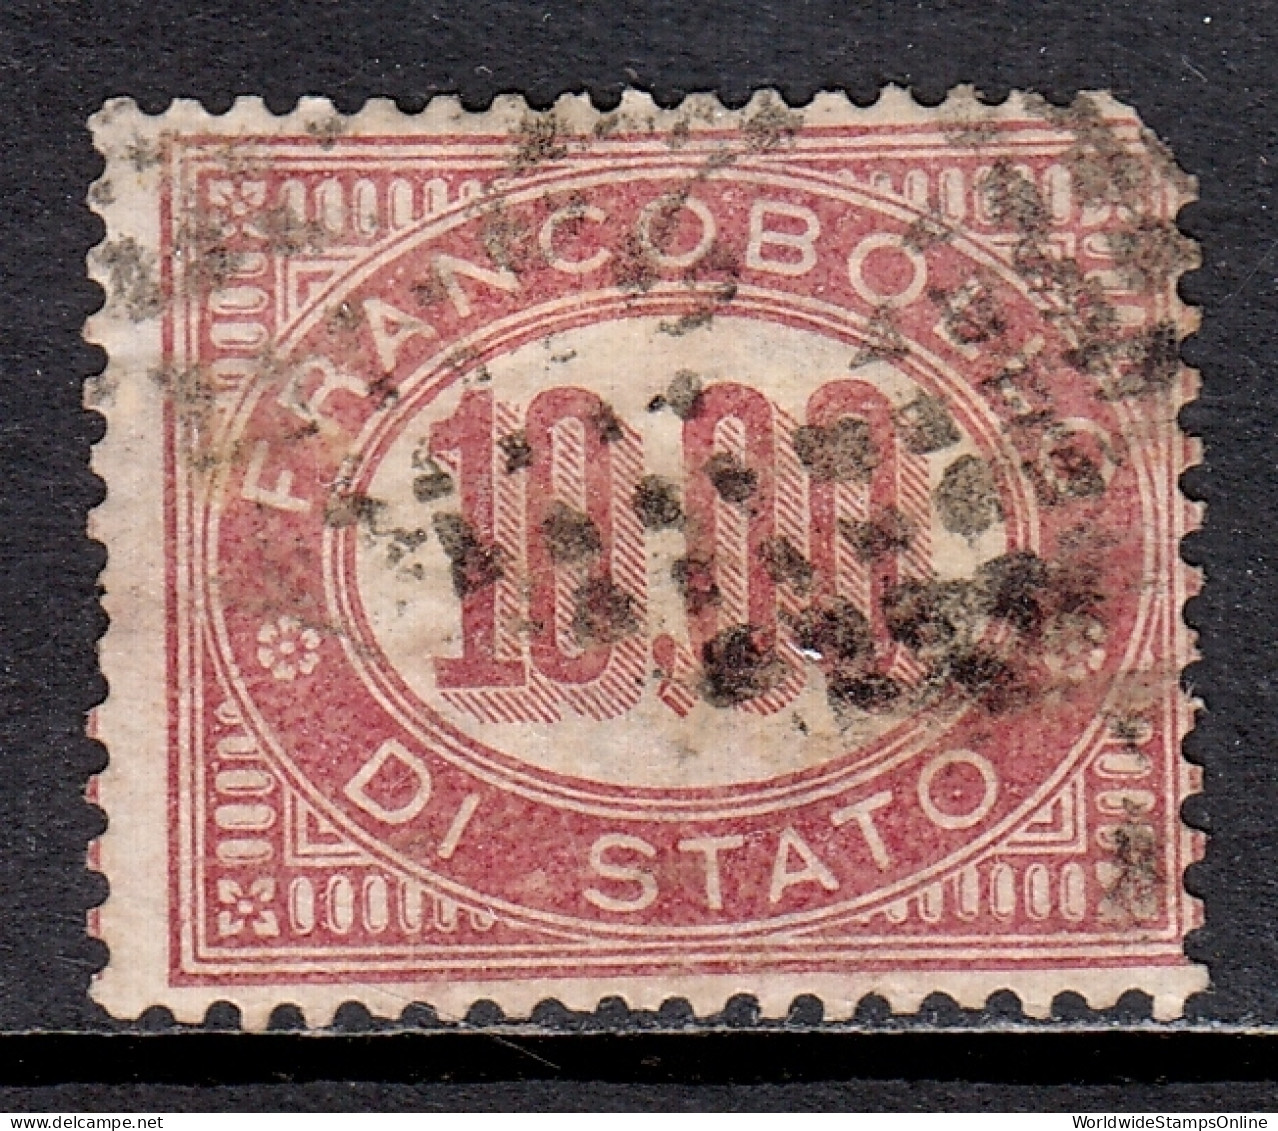 Italy - Scott #O8 - Used - Crease, Rounded Corner UR - SCV $135 - Officials